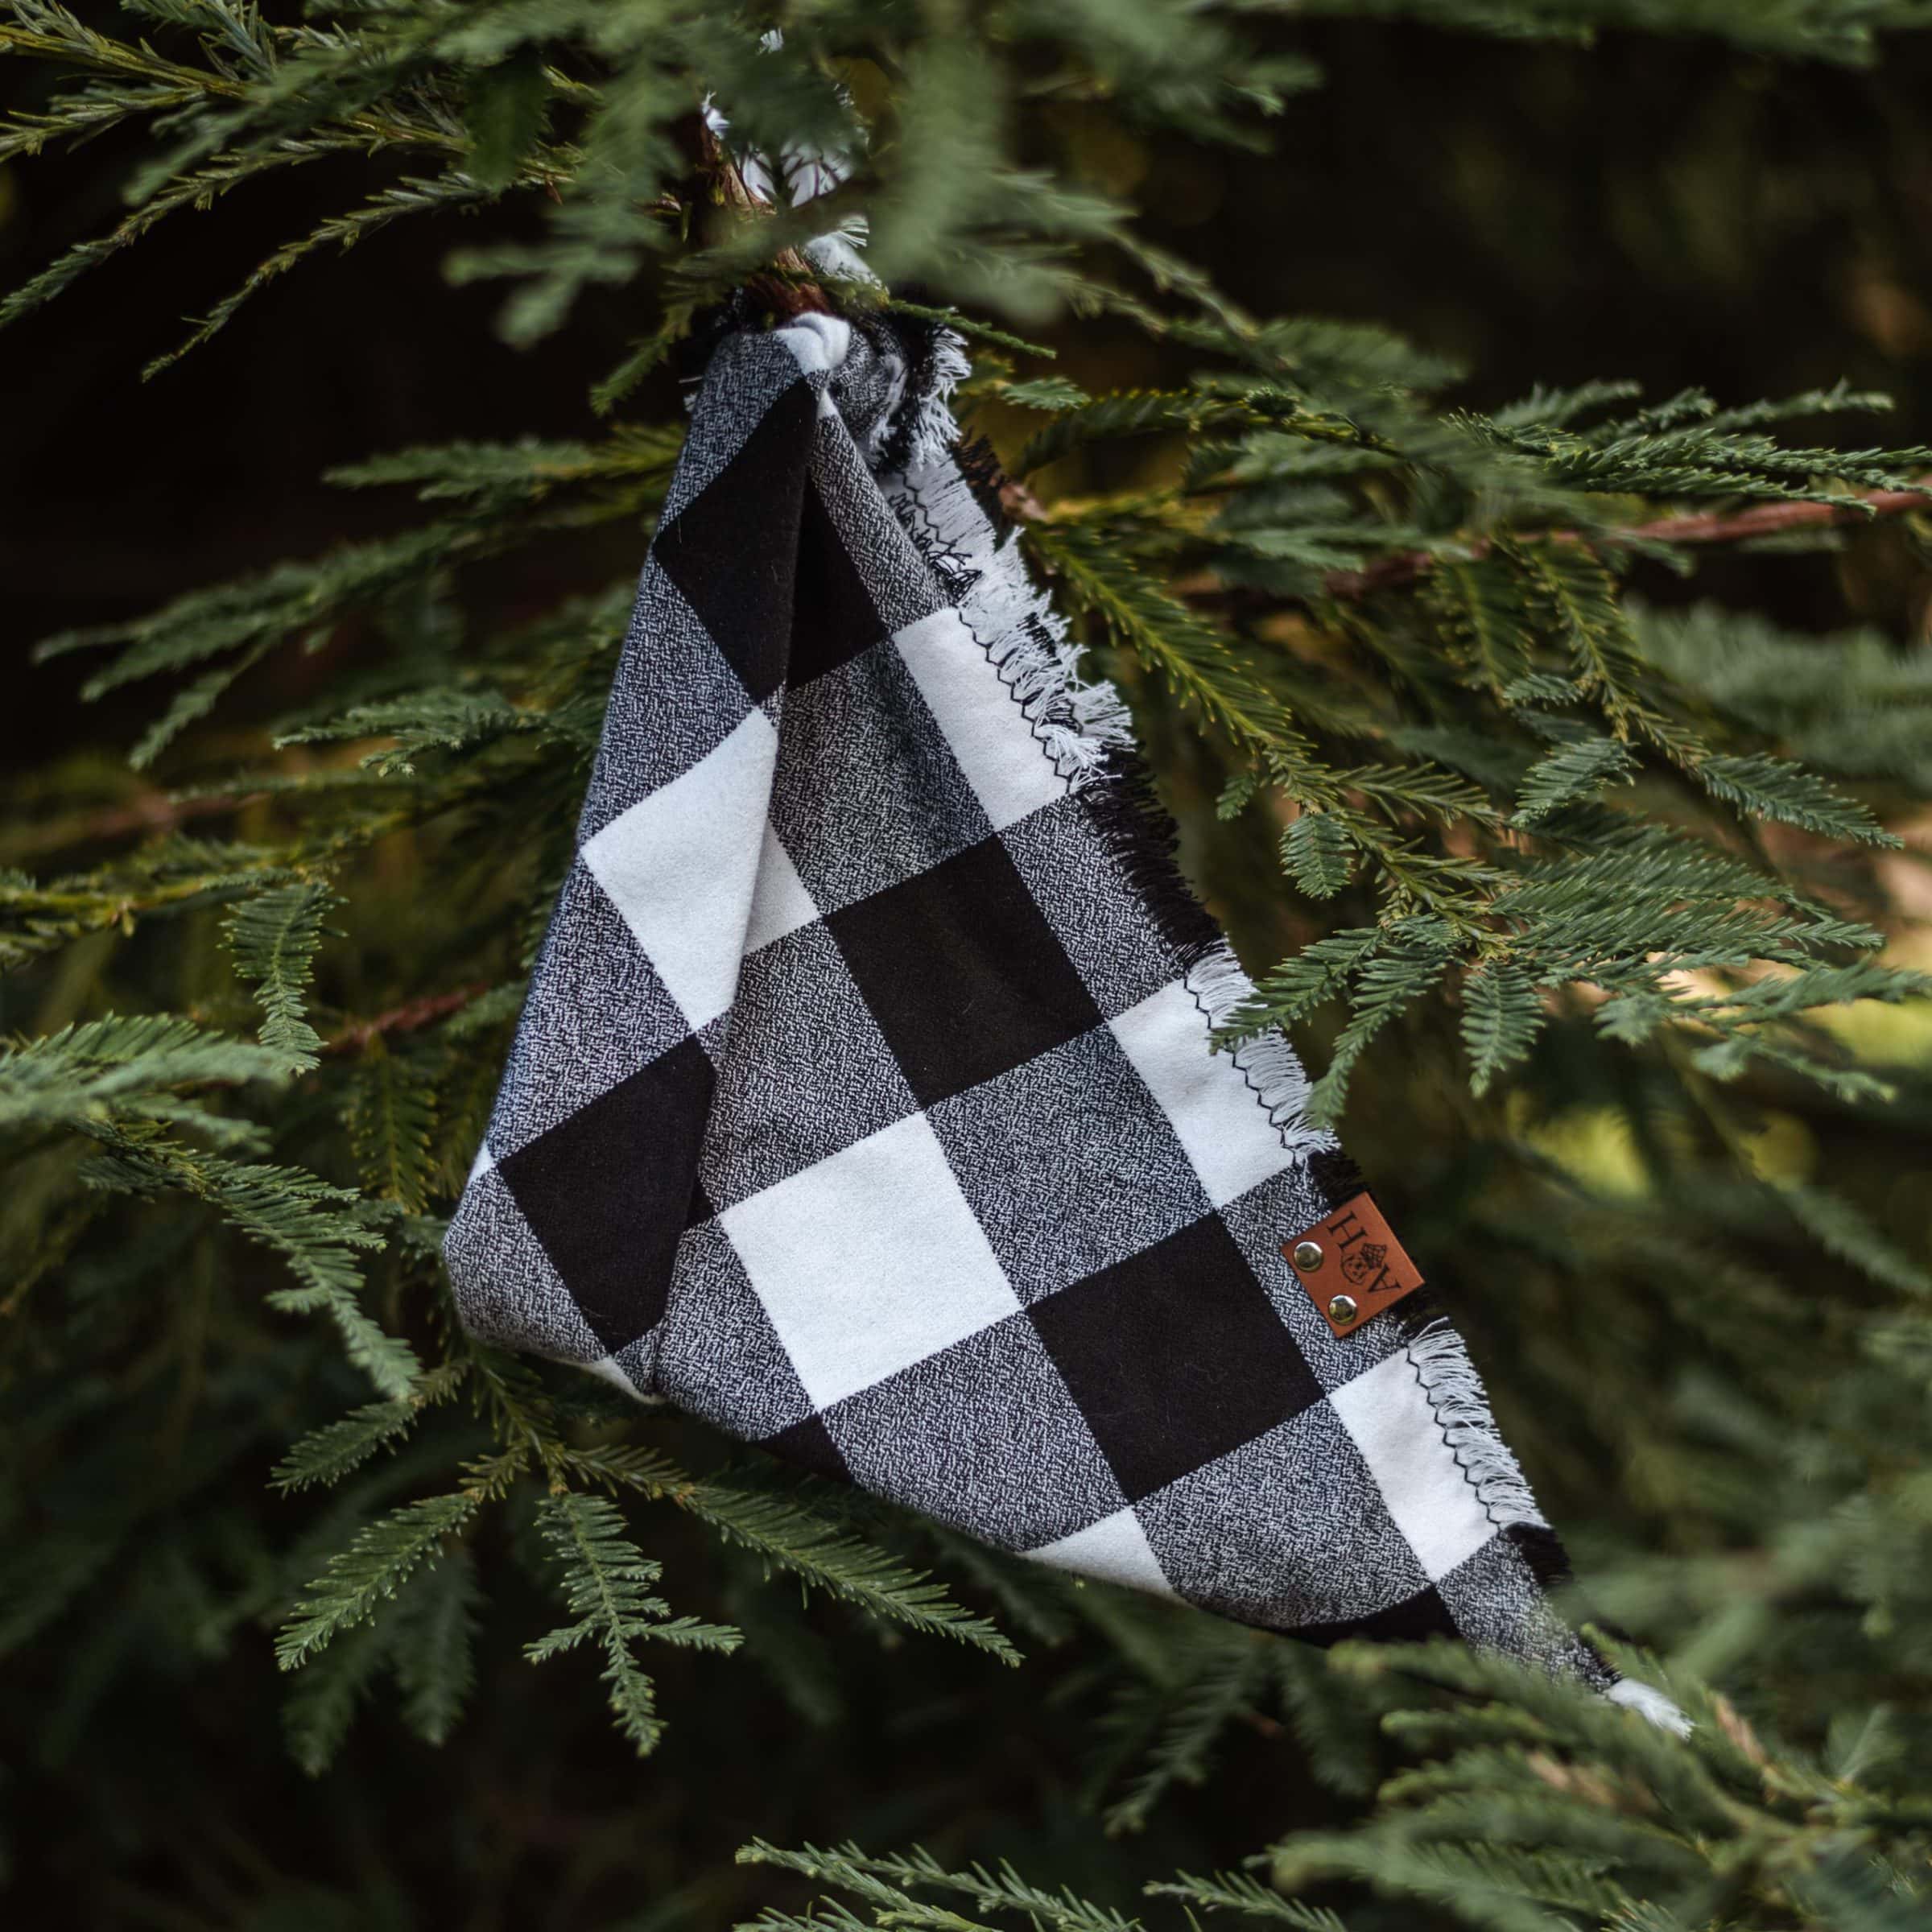 Chester Frayed Dog Bandana in Black and white hanging in a pine tree